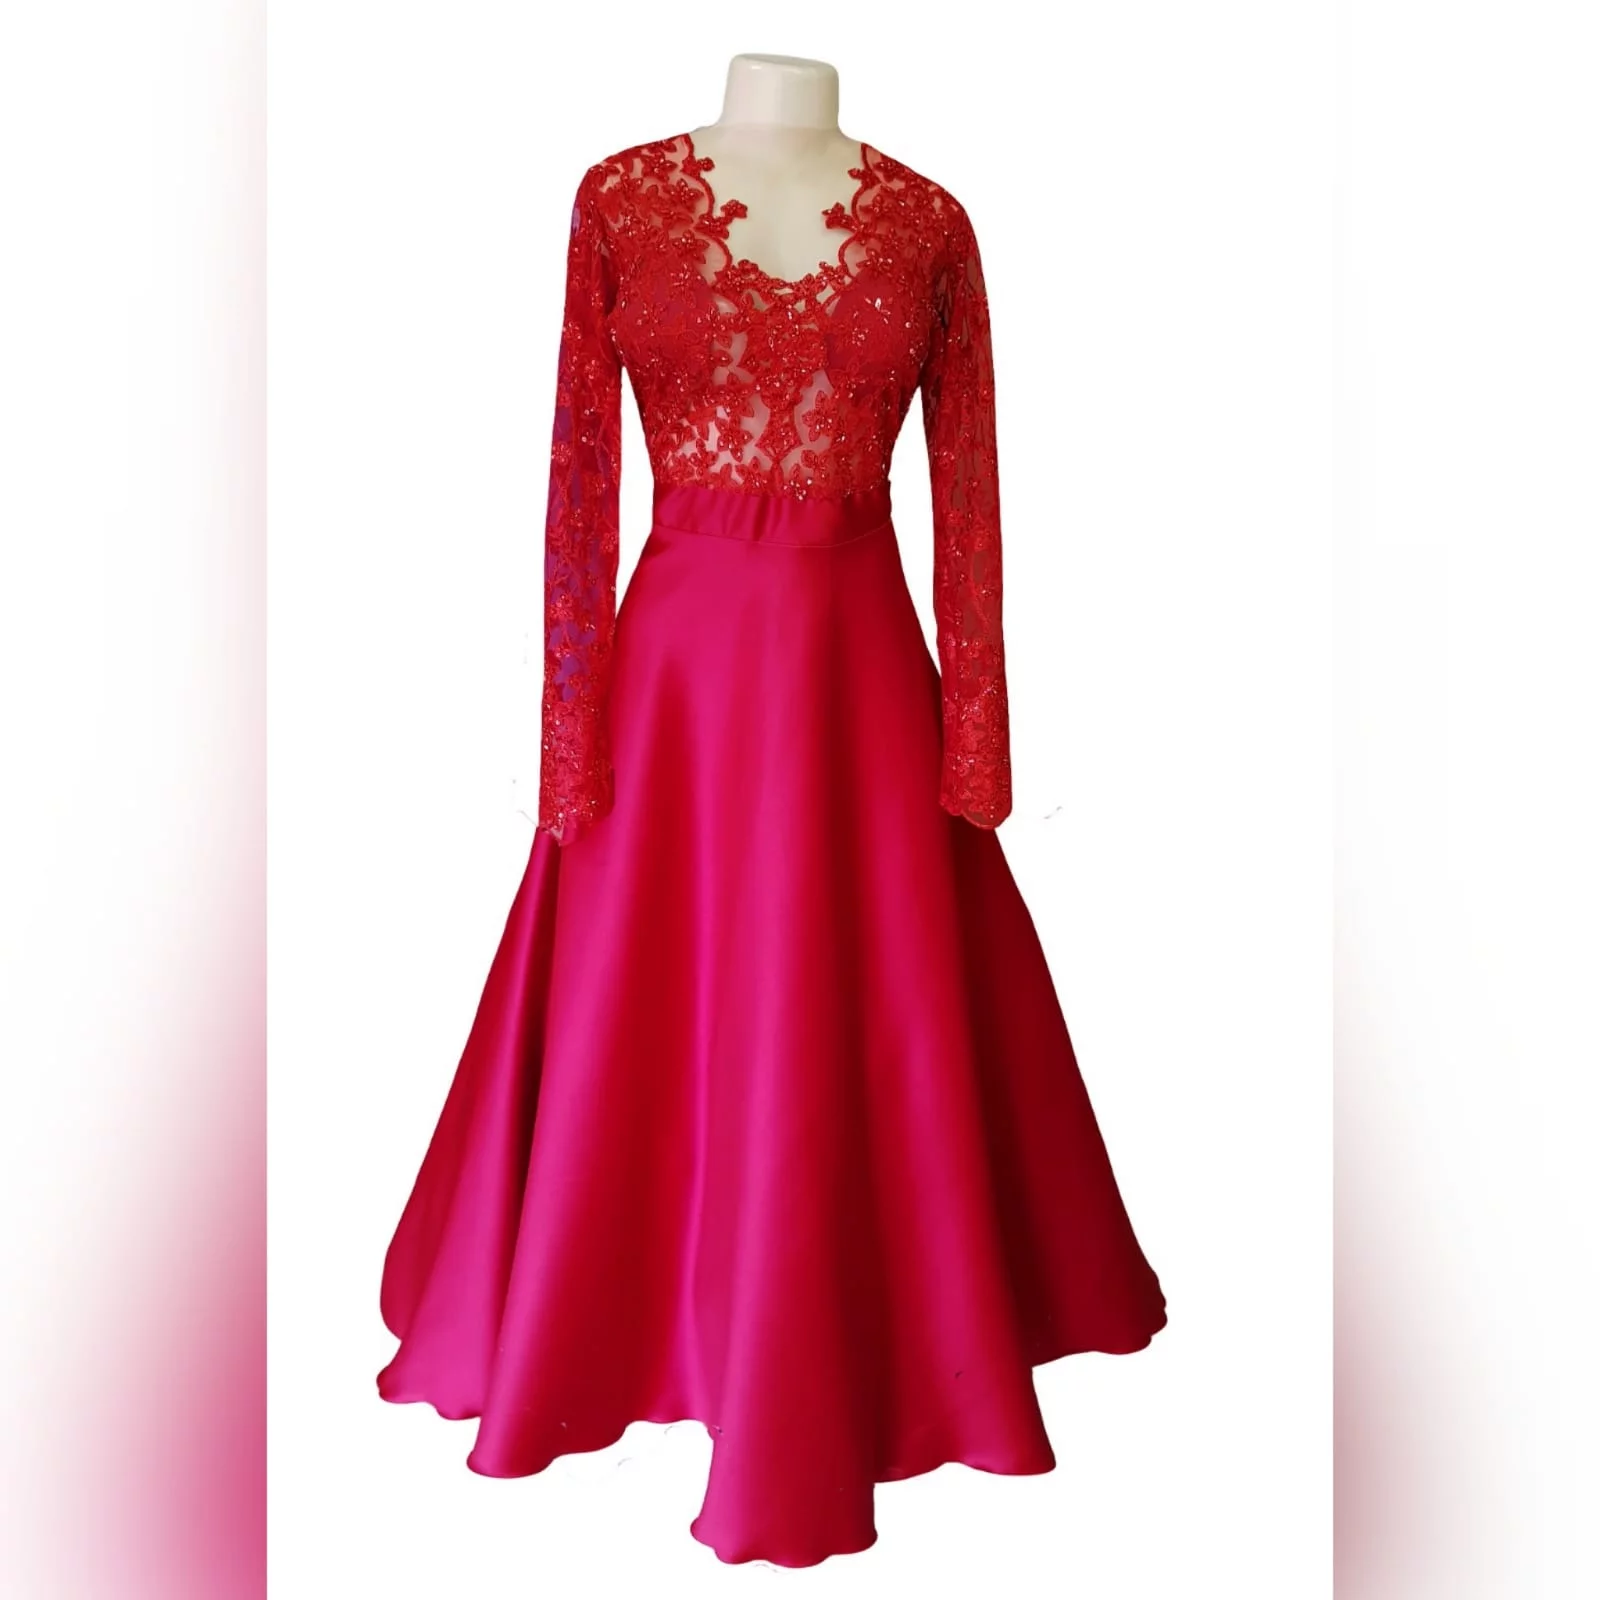 Classic red lace and satin matric farewell dress 10 <blockquote>"don't compromise yourself. You're all you've got. " janis joplin</blockquote> a classic red lace and satin prom dress created for my client's special occasion. With a sheer lace and sleeves bodice with a touch of shine, and a row of buttons to finish off the sensual back design.